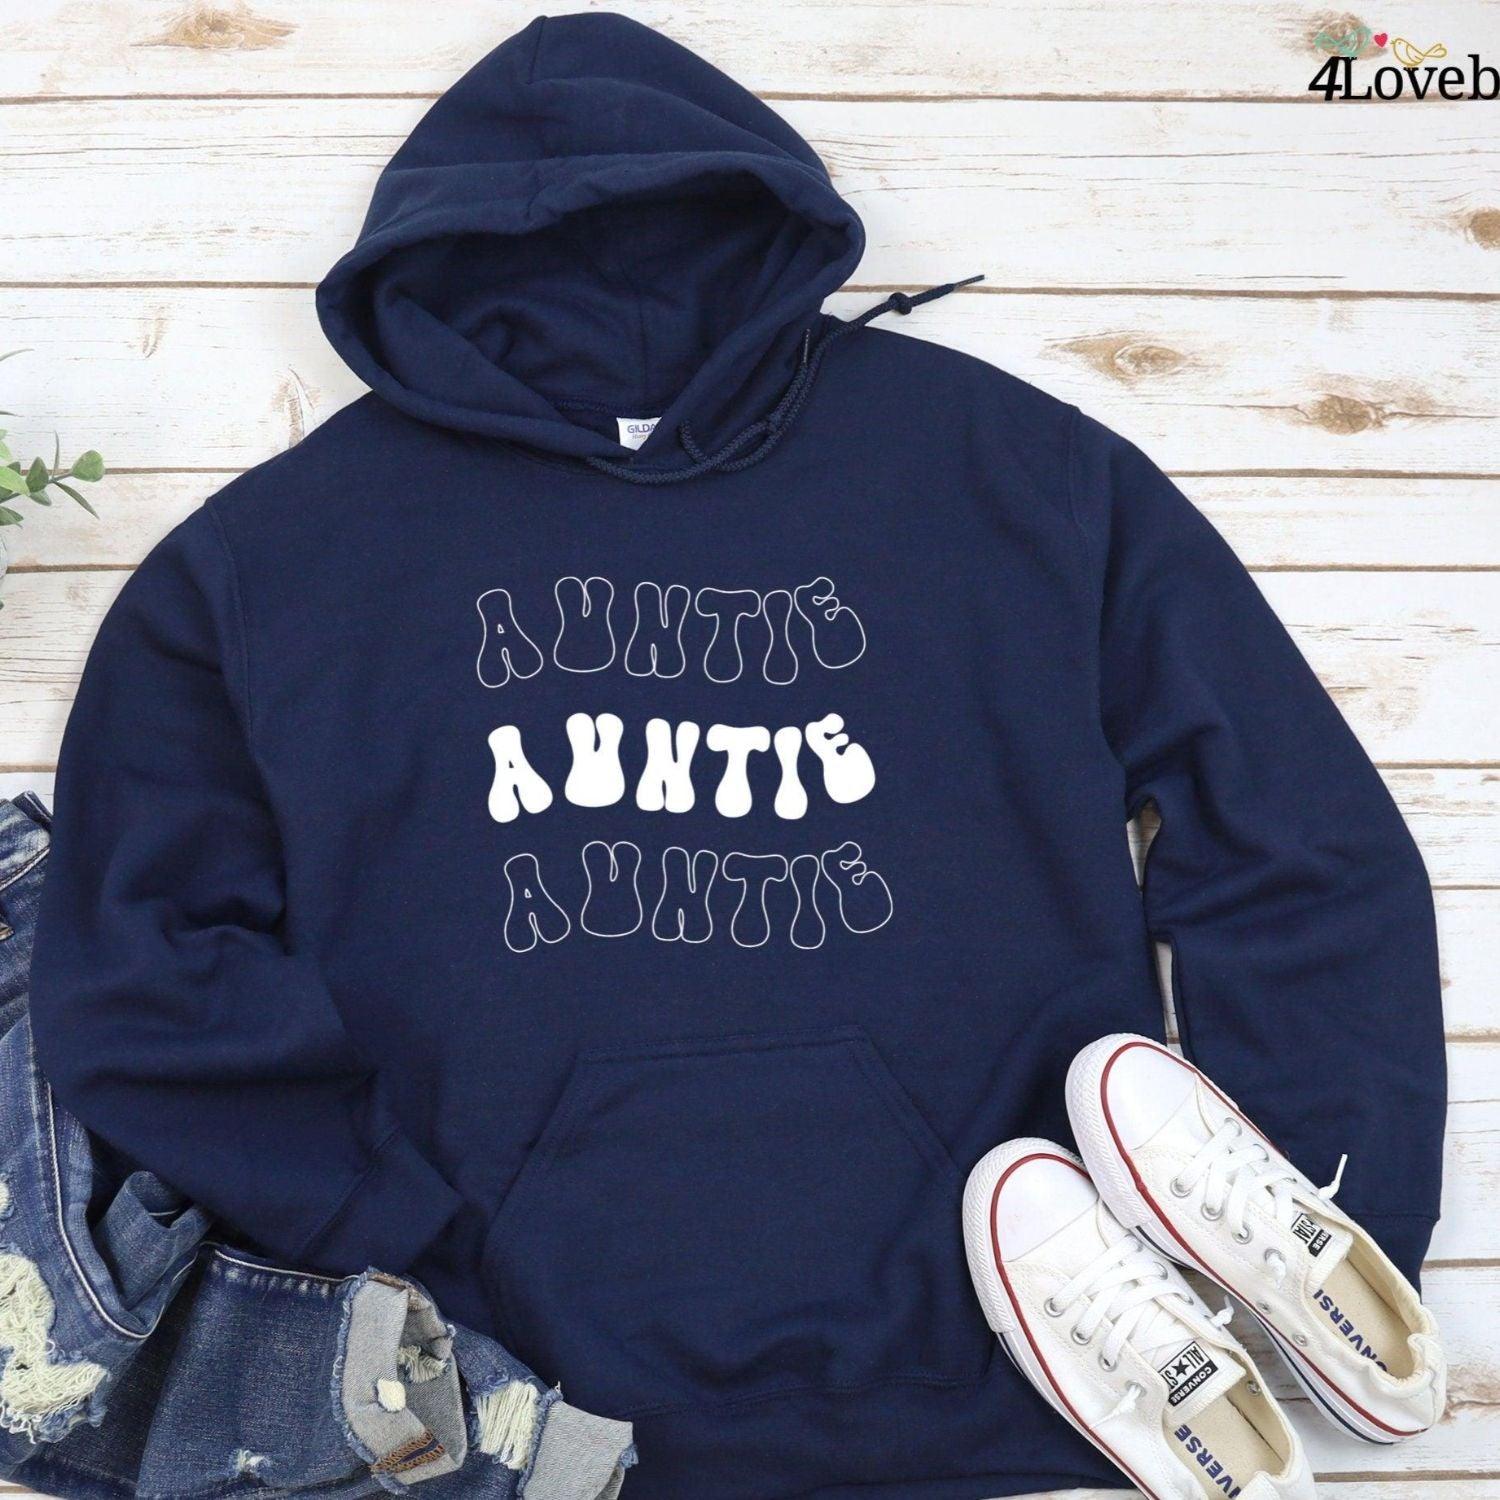 Auntie & Uncle Matching Sets: Fun Birthday Gifts from Nephew/Niece - Trendy Outfits! - 4Lovebirds